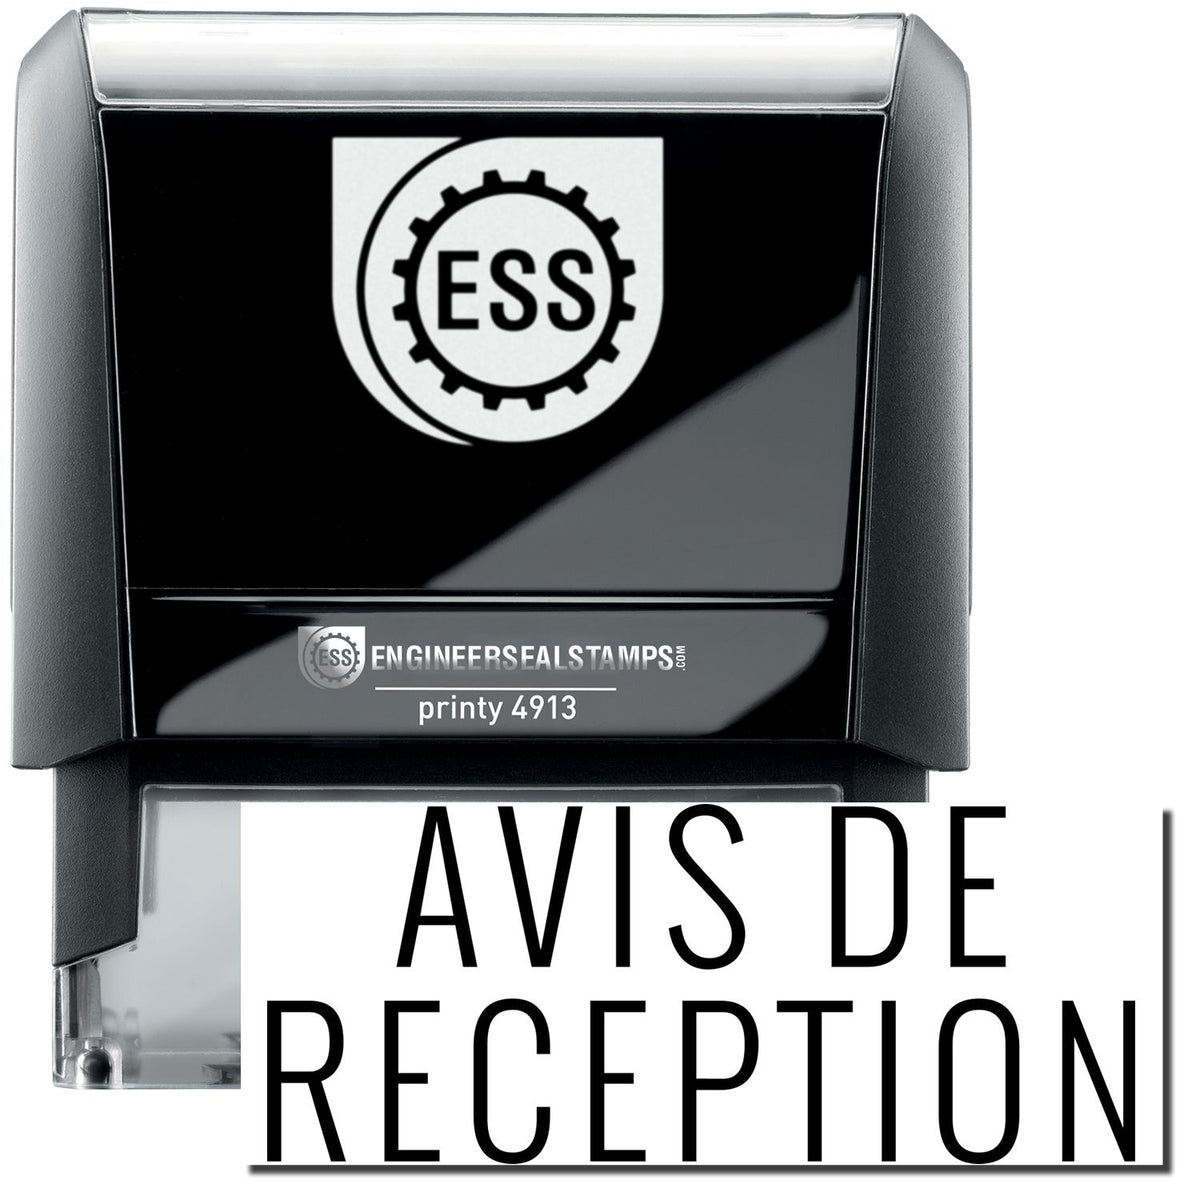 A self-inking stamp with a stamped image showing how the text &quot;AVIS DE RECEPTION&quot; in a large font is displayed by it after stamping.